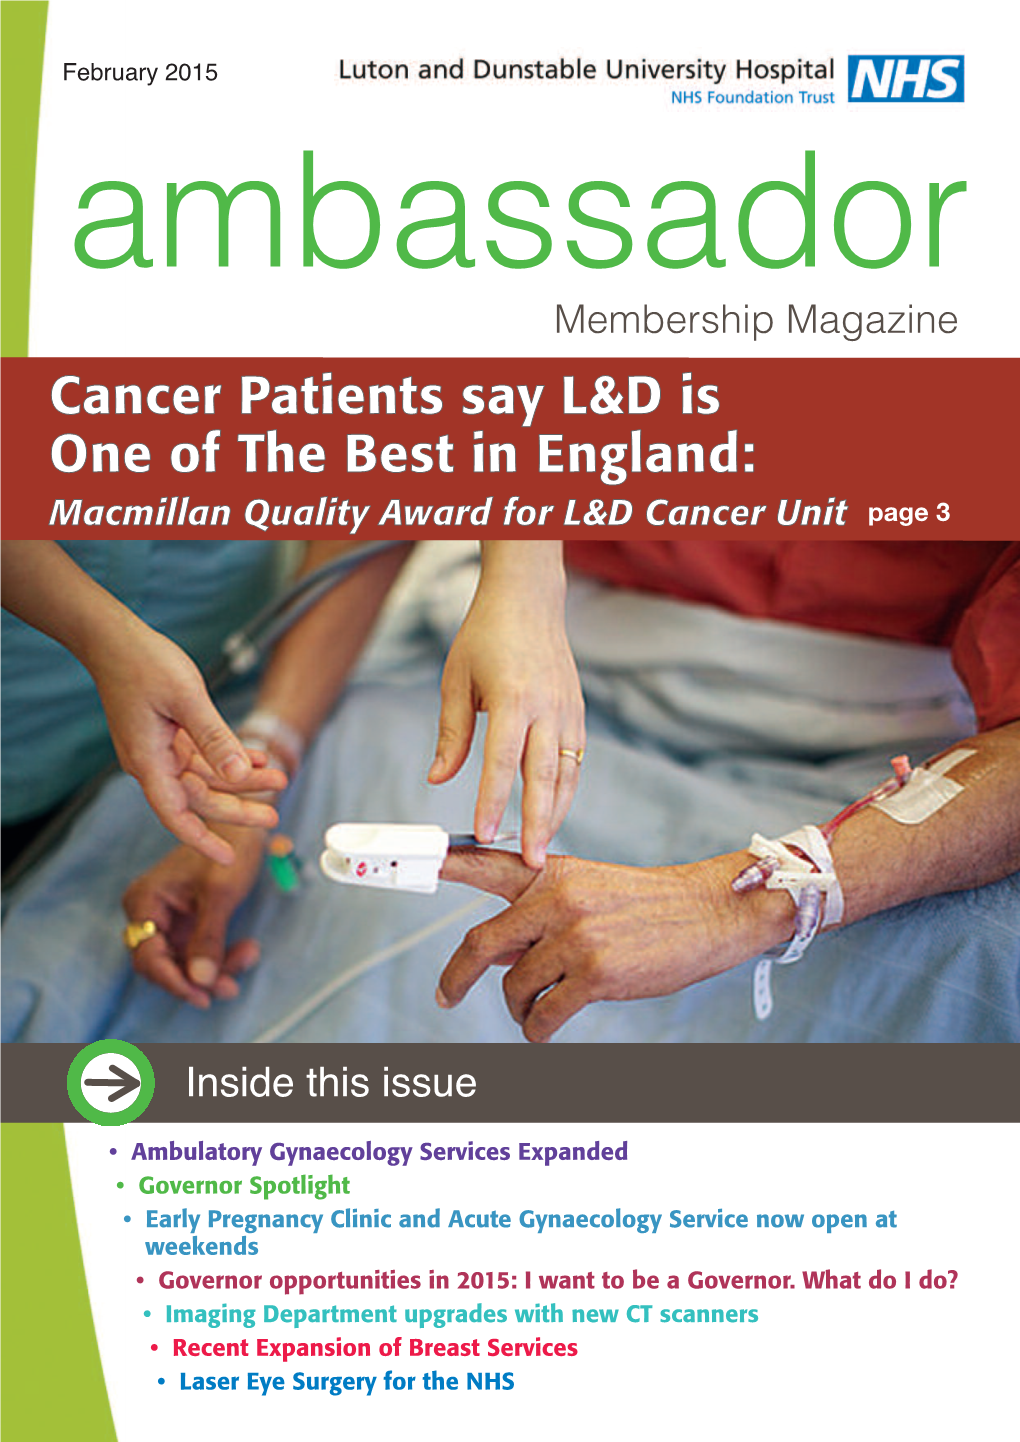 Cancer Patients Say L&D Is One of the Best in England